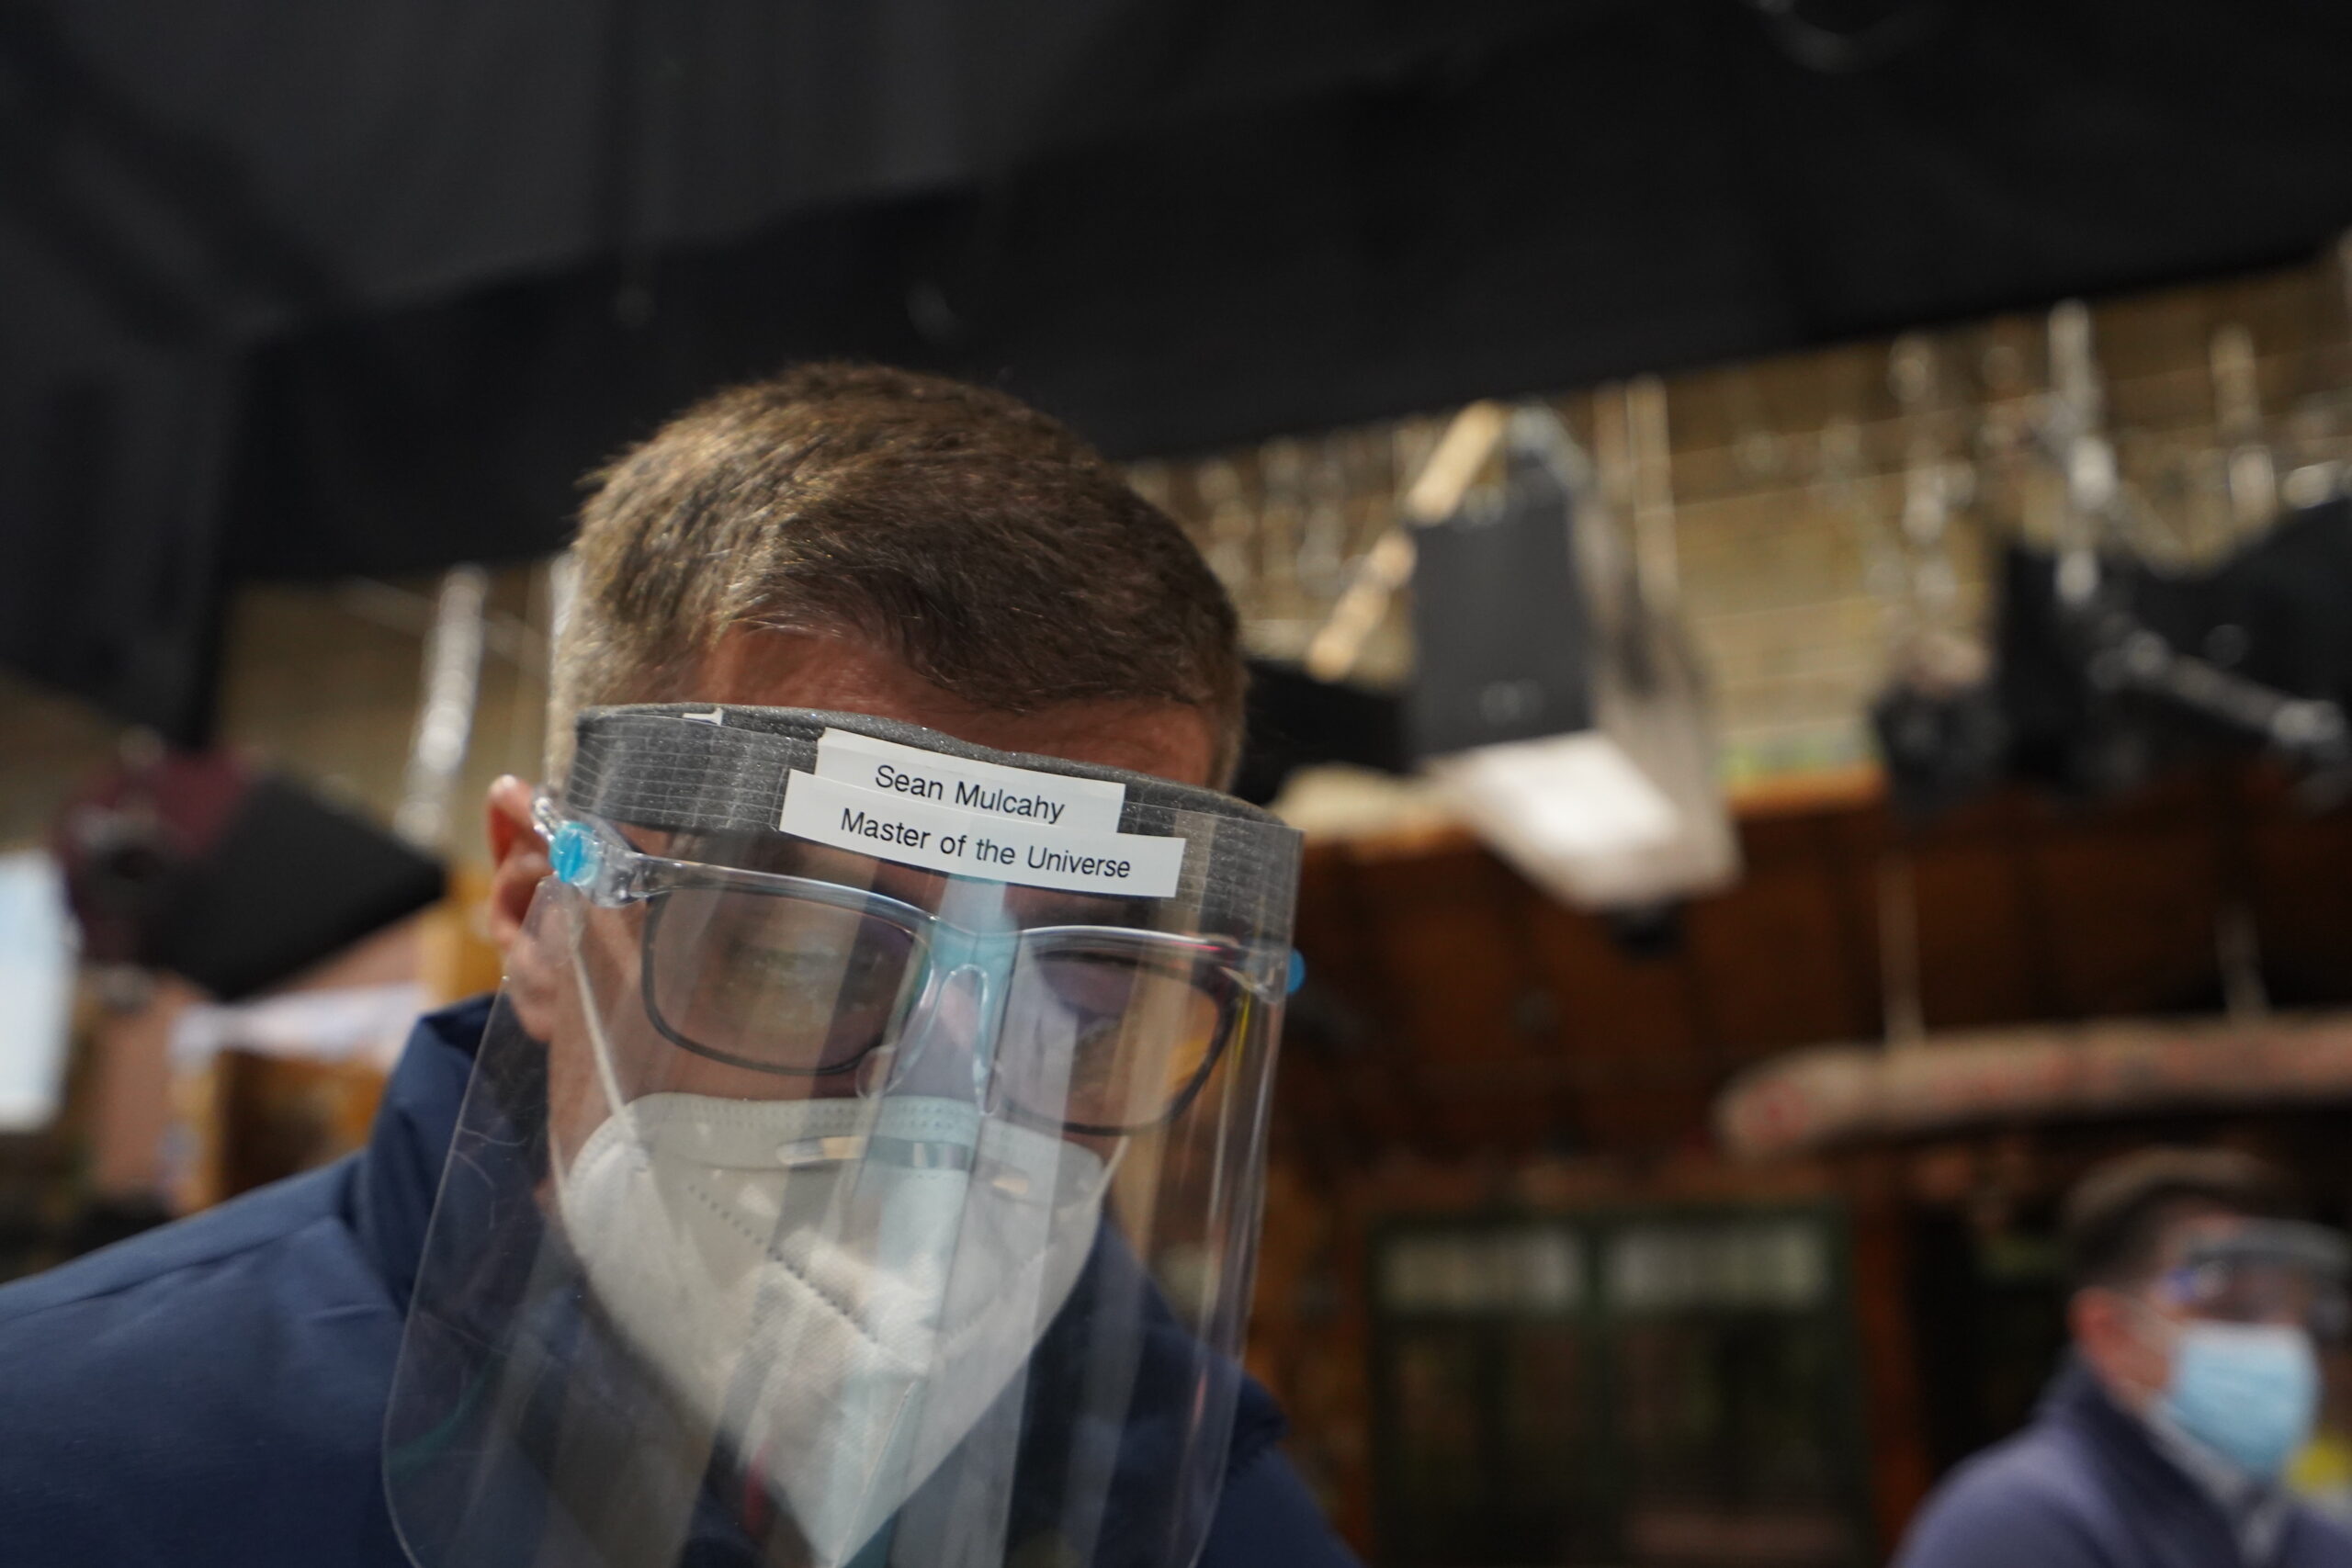 Sean Mulcahy on the set of Disney Channel's Bunk'd. While on set, all non-talent crew members must wear network-approved face masks, face shield, and cannot drink or eat on stage. Covid testing is done three times a week. [Photo: Lilian Manansala]